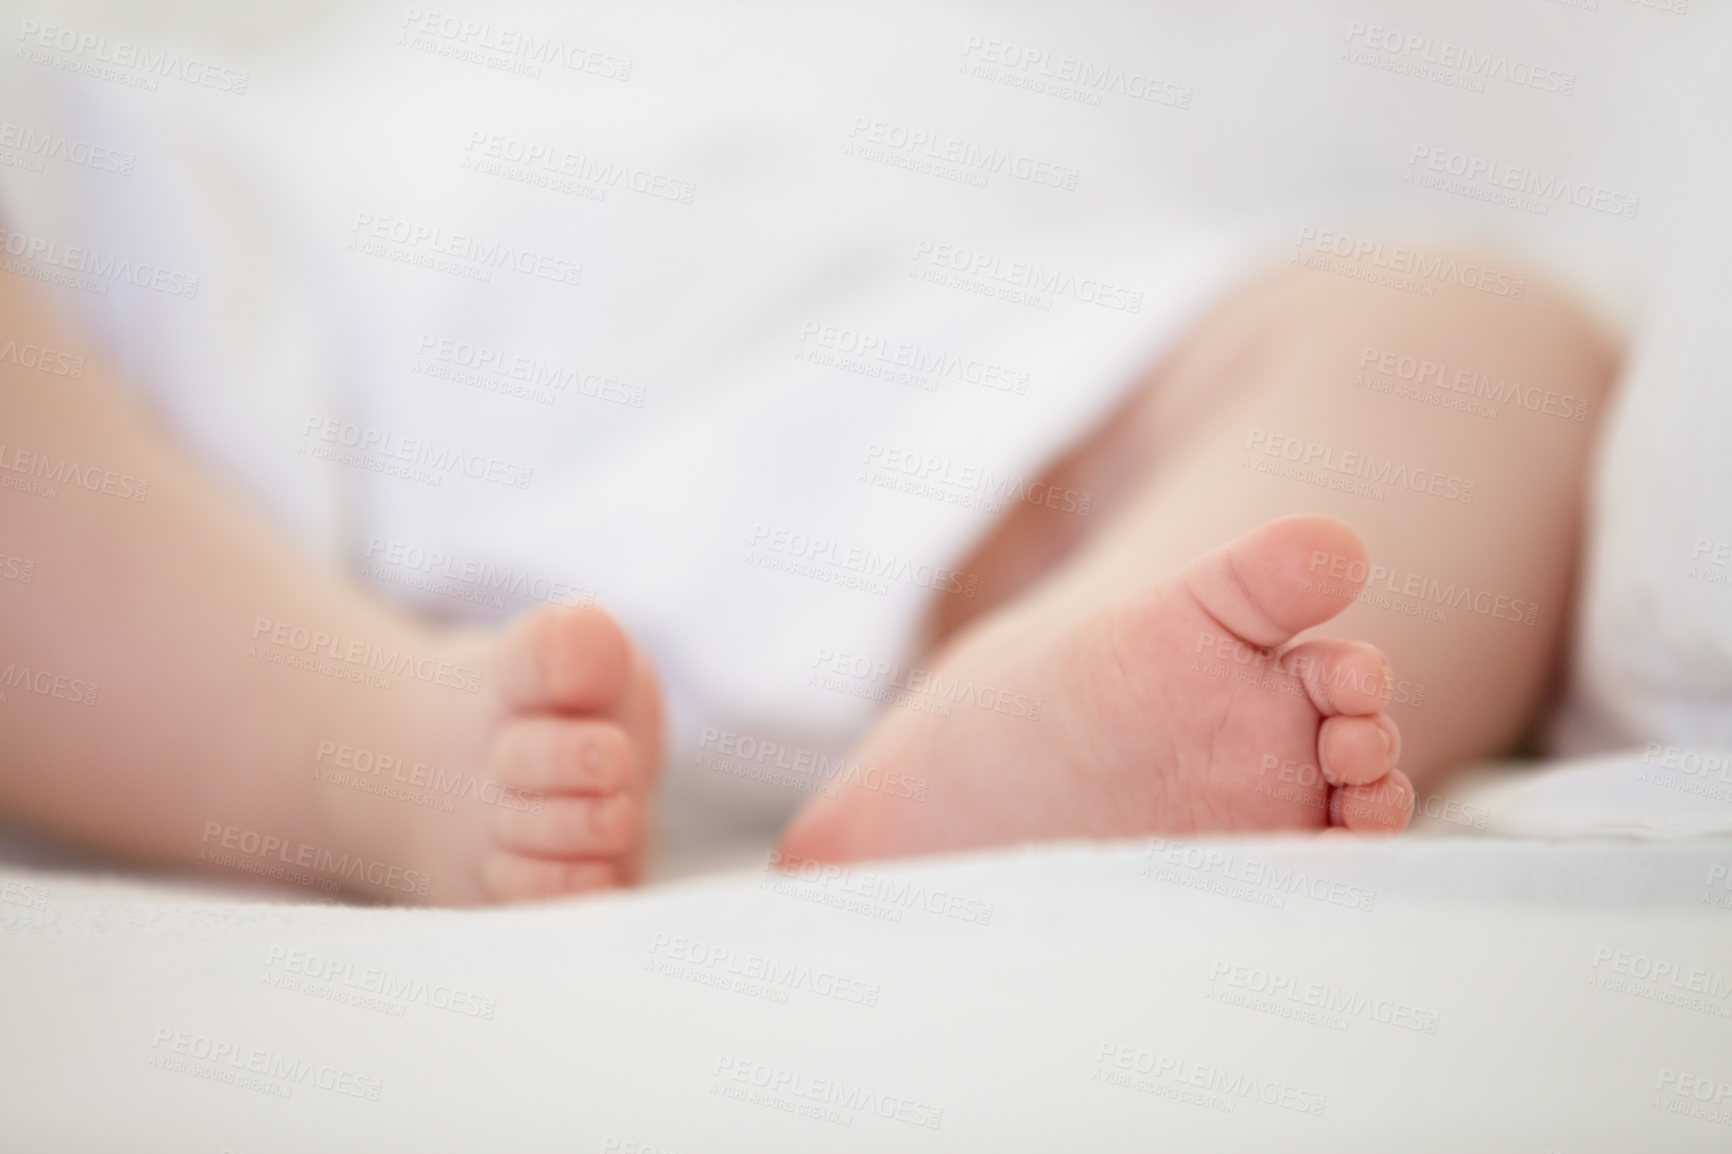 Buy stock photo Sleeping, bed and feet of baby in home for dreaming, resting and nap for child development. Family, nursery and closeup of toes of newborn infant in bedroom relax for wellness, health and growth